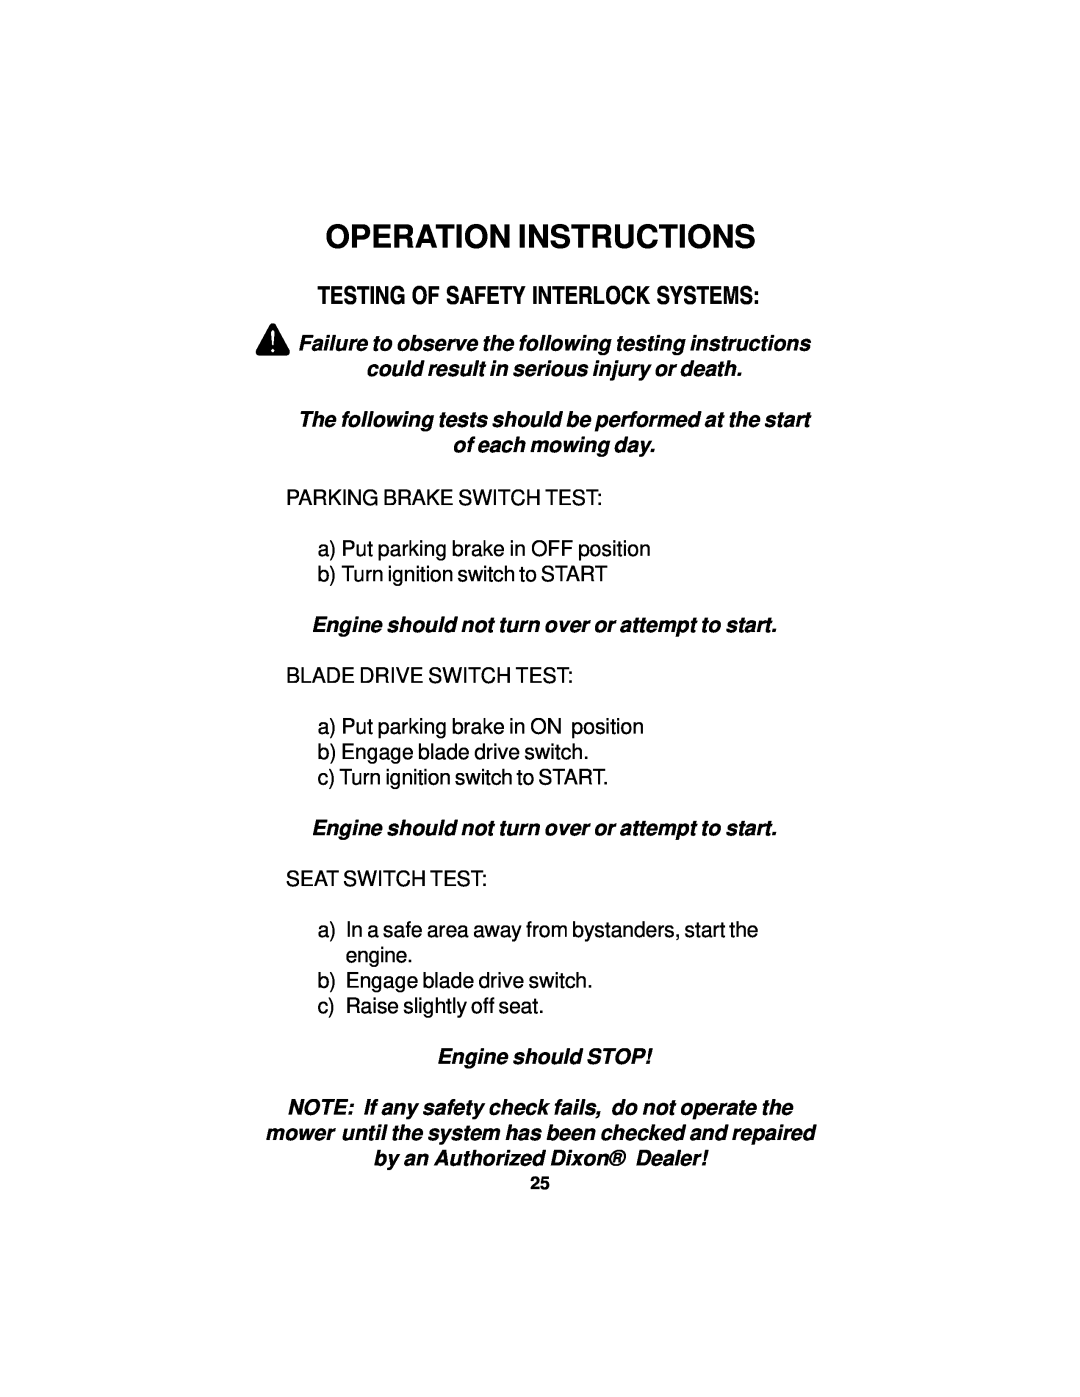 Dixon 14295-0804 manual Testing Of Safety Interlock Systems, Operation Instructions 